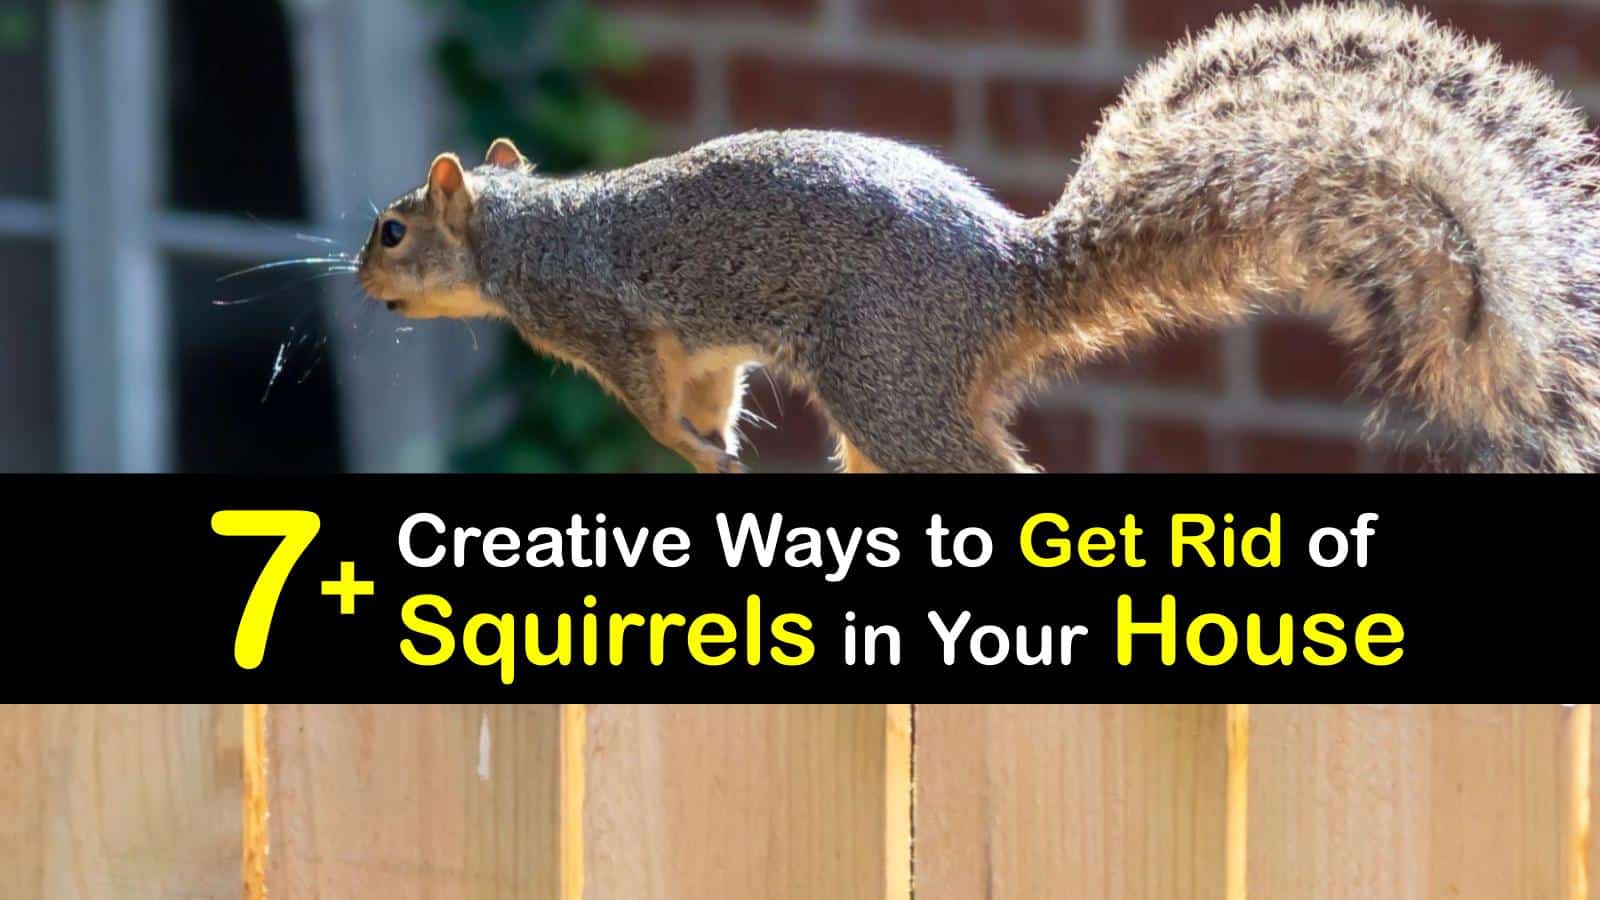 How can i get rid of squirrels in the attic